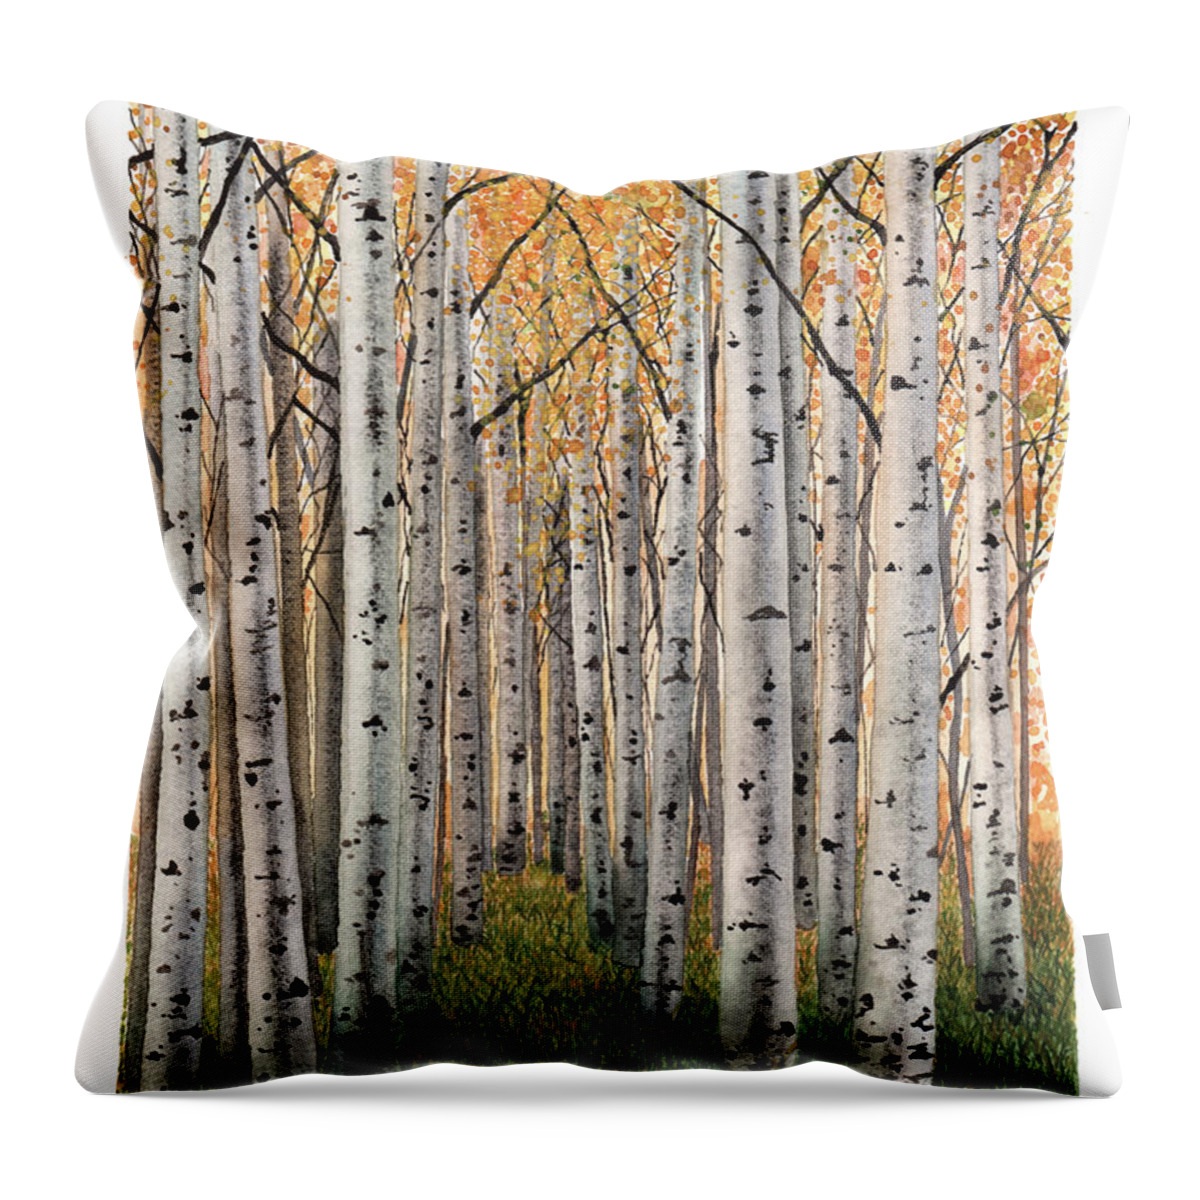 Forest Throw Pillow featuring the painting Sierra Aspens by Hilda Wagner